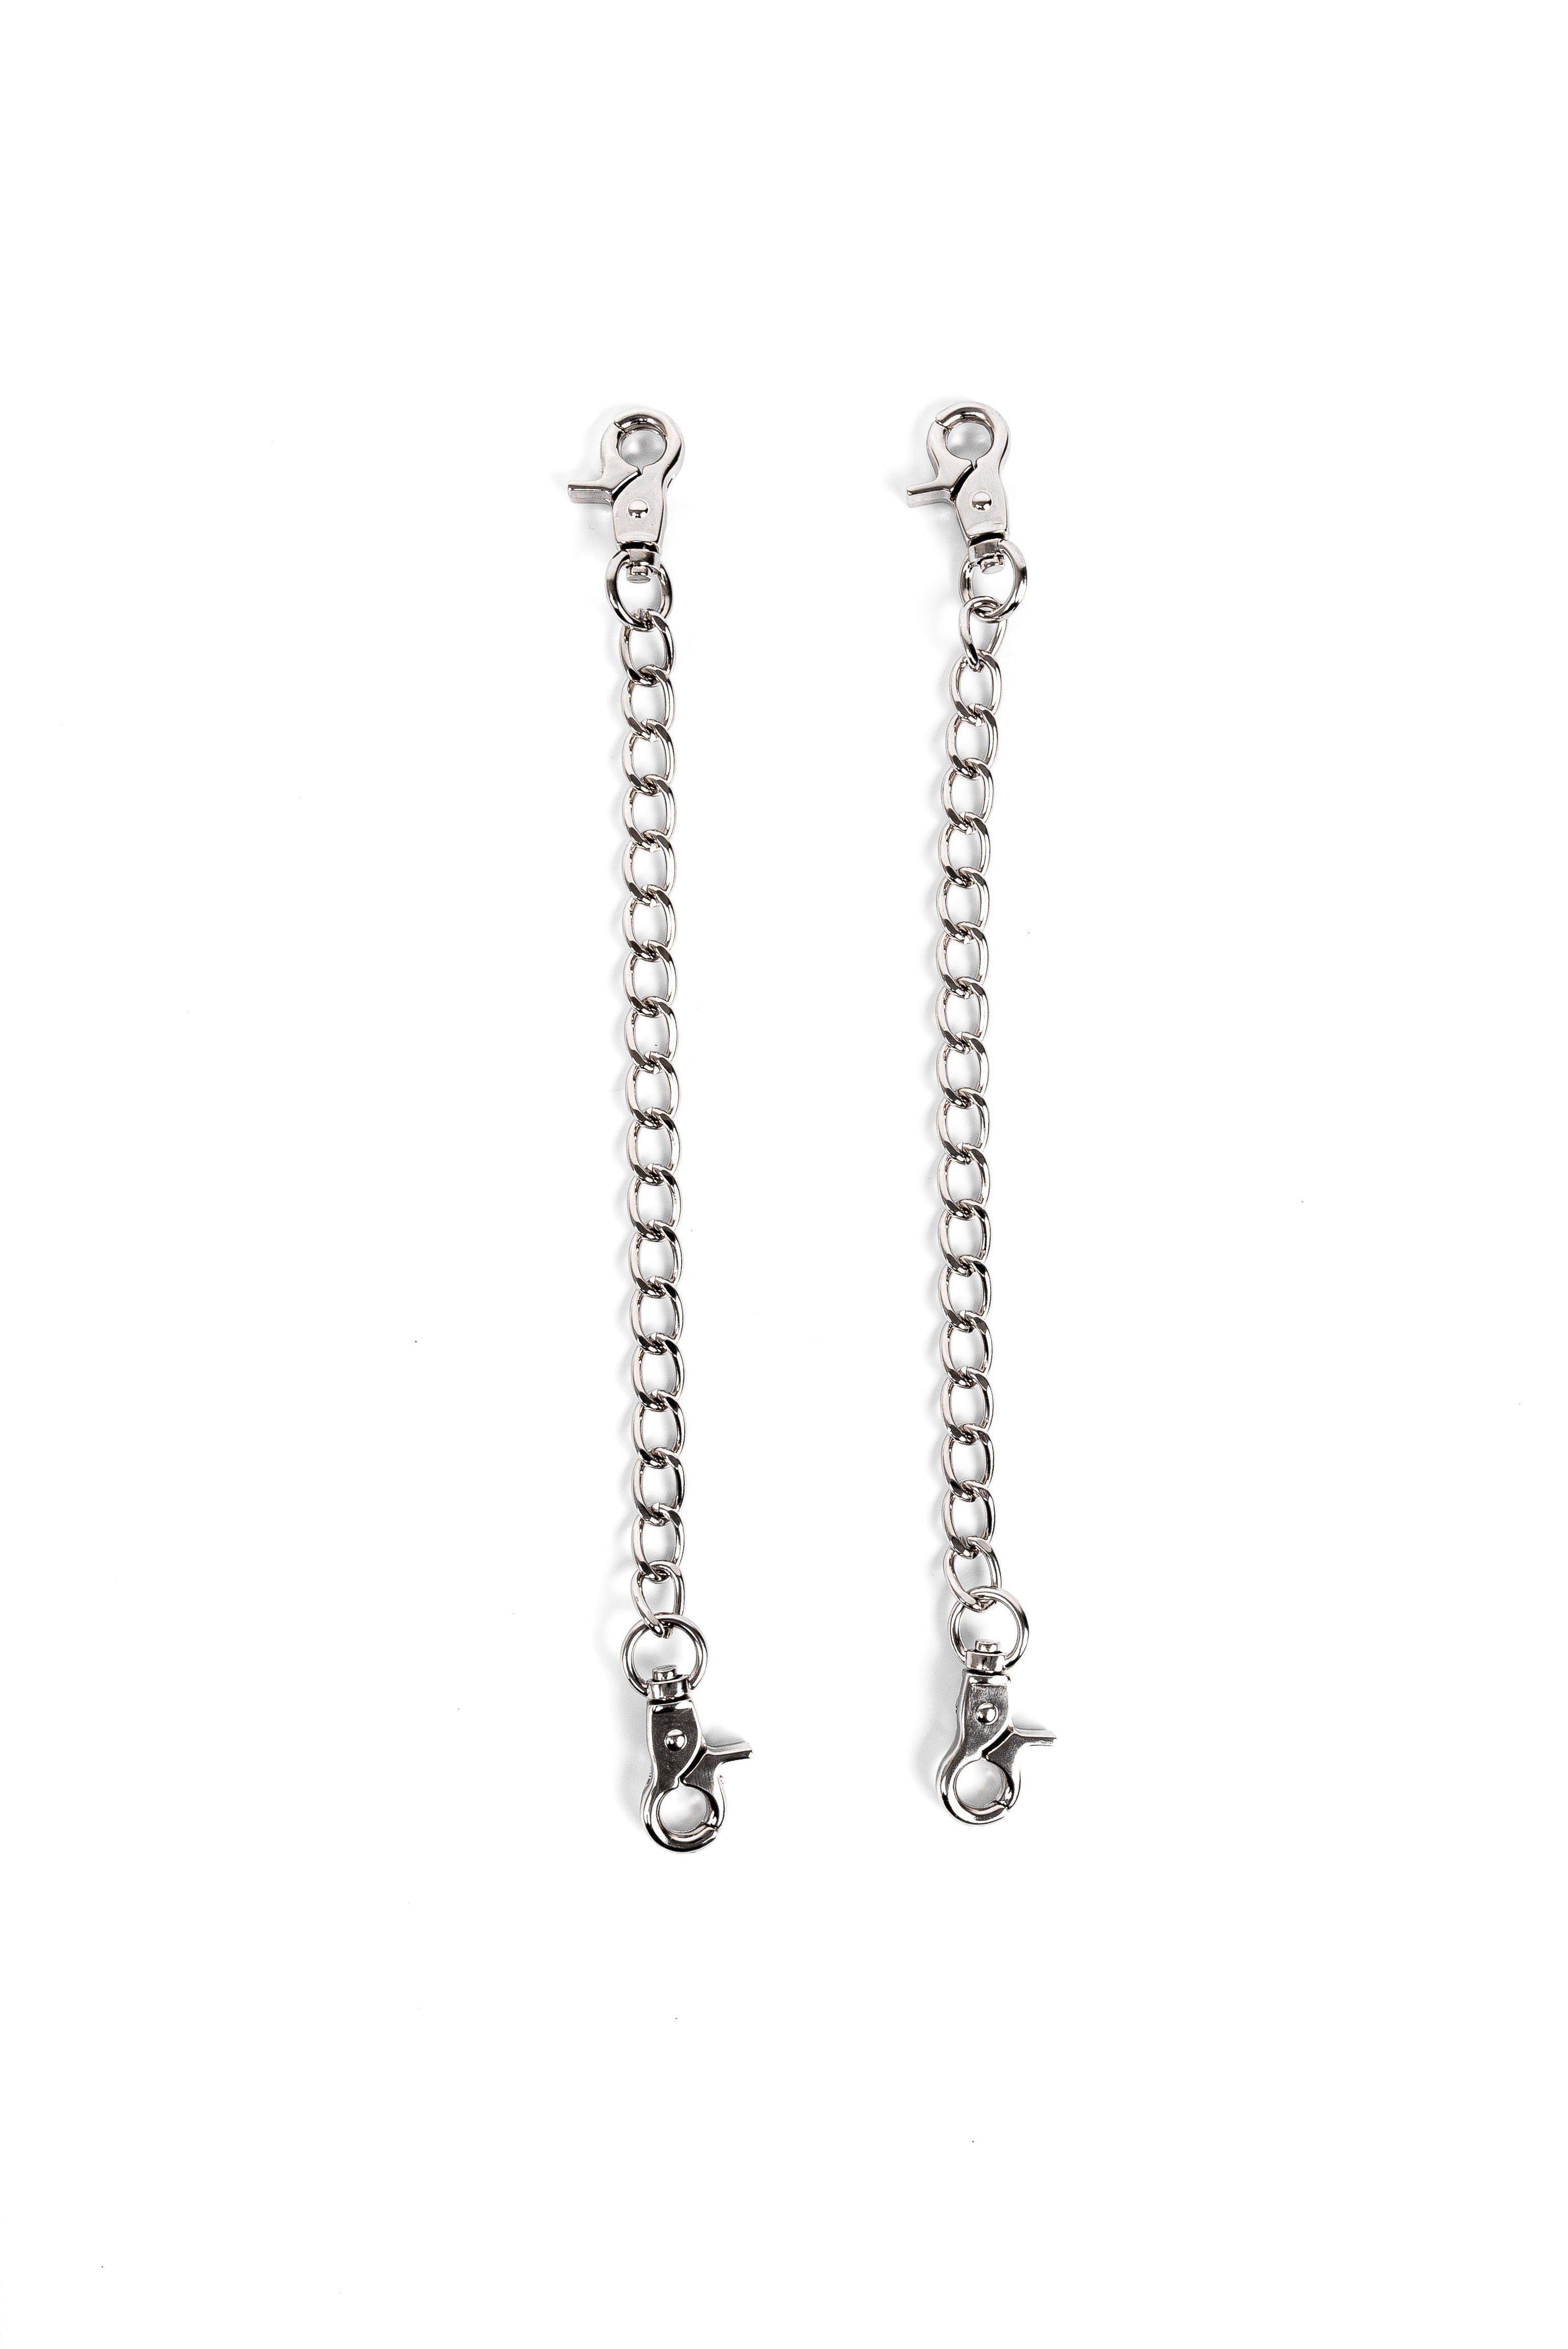 Set of 2 Standard chain connectors with carabiners for cuffs, belt, thighs